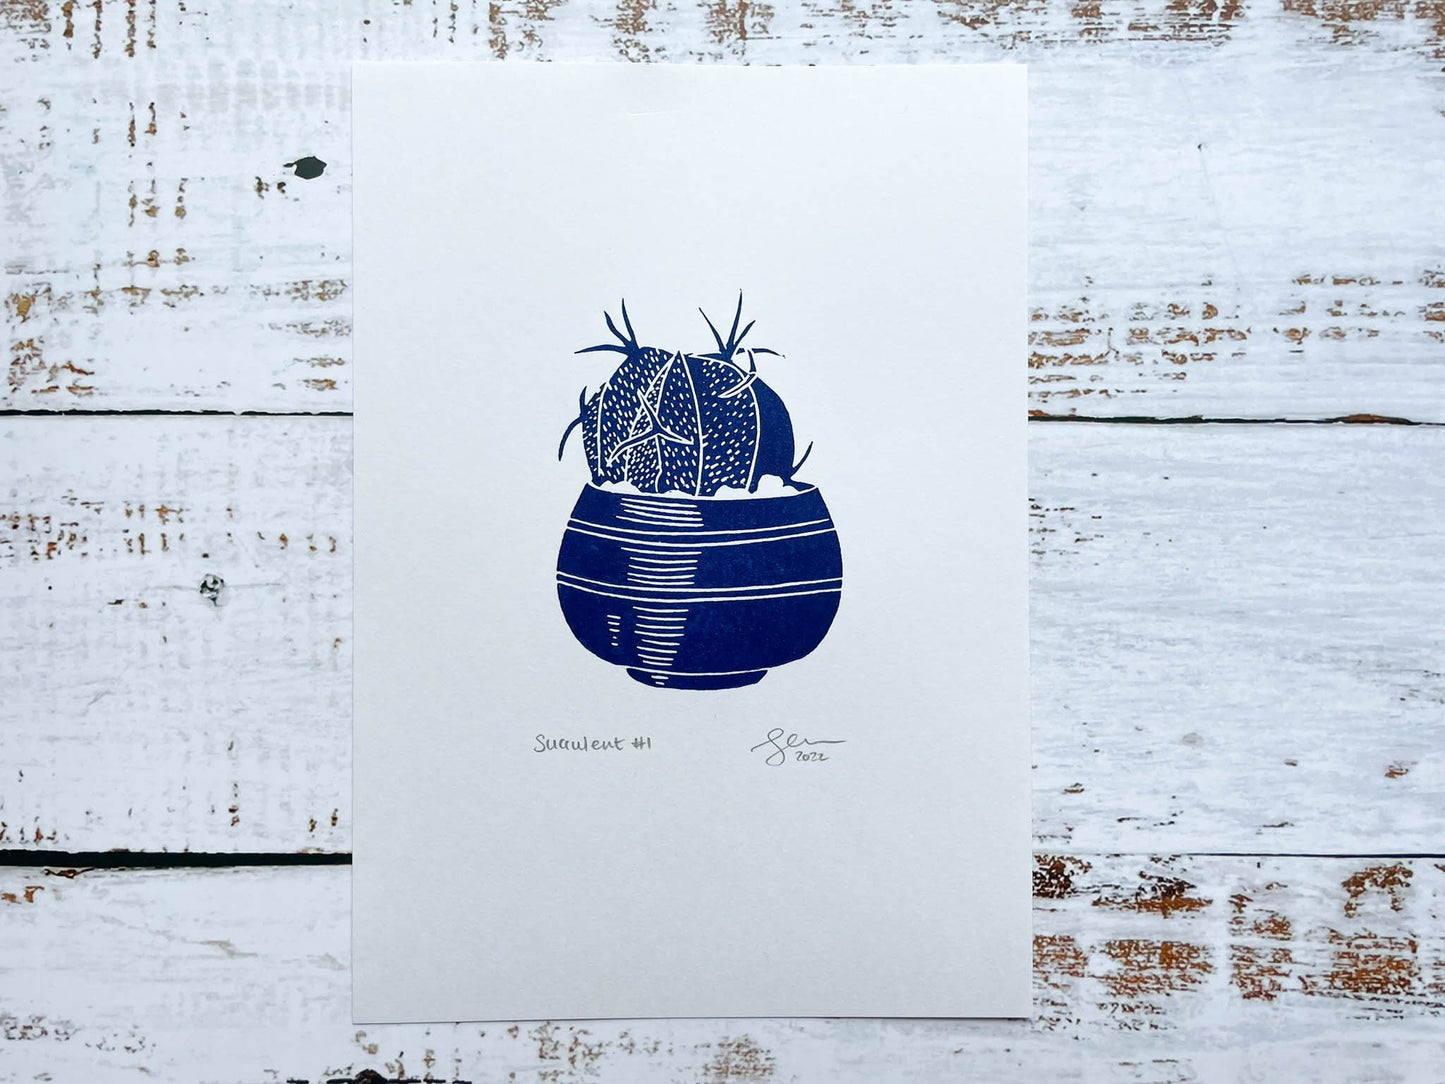 A small blue lino print of a little potted succulent